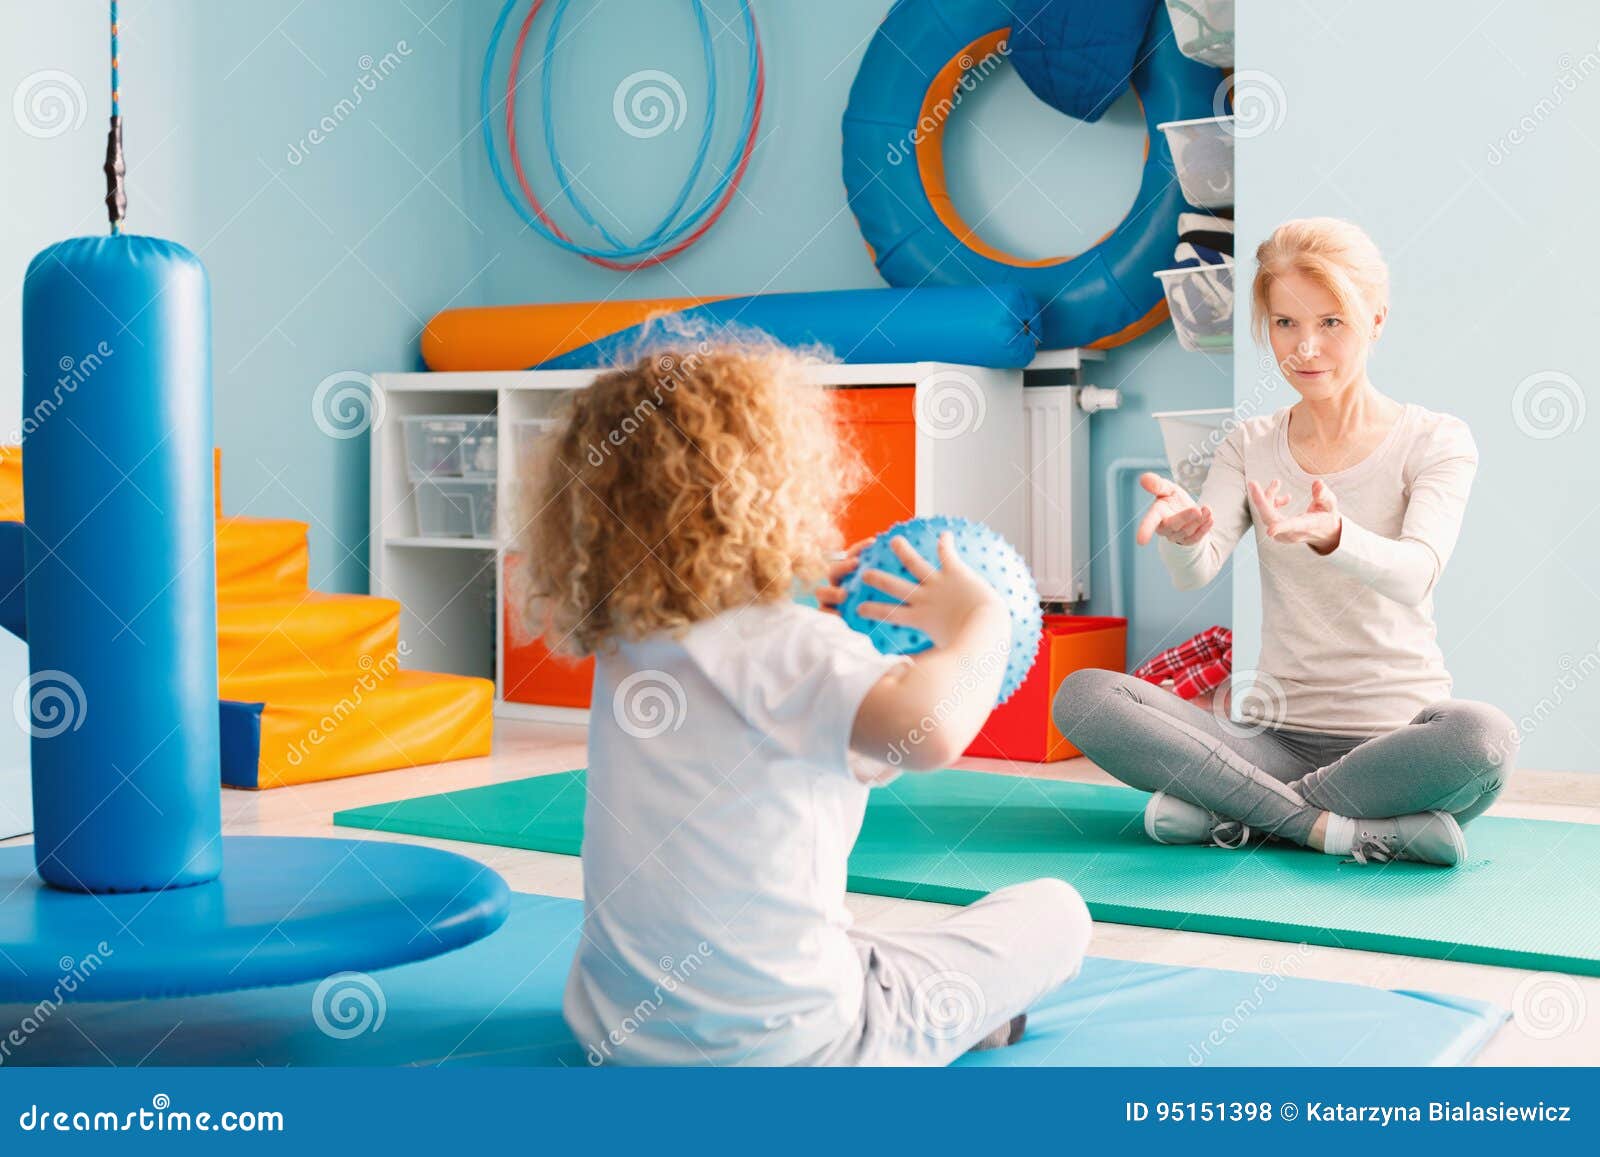 boy playing with his therapist